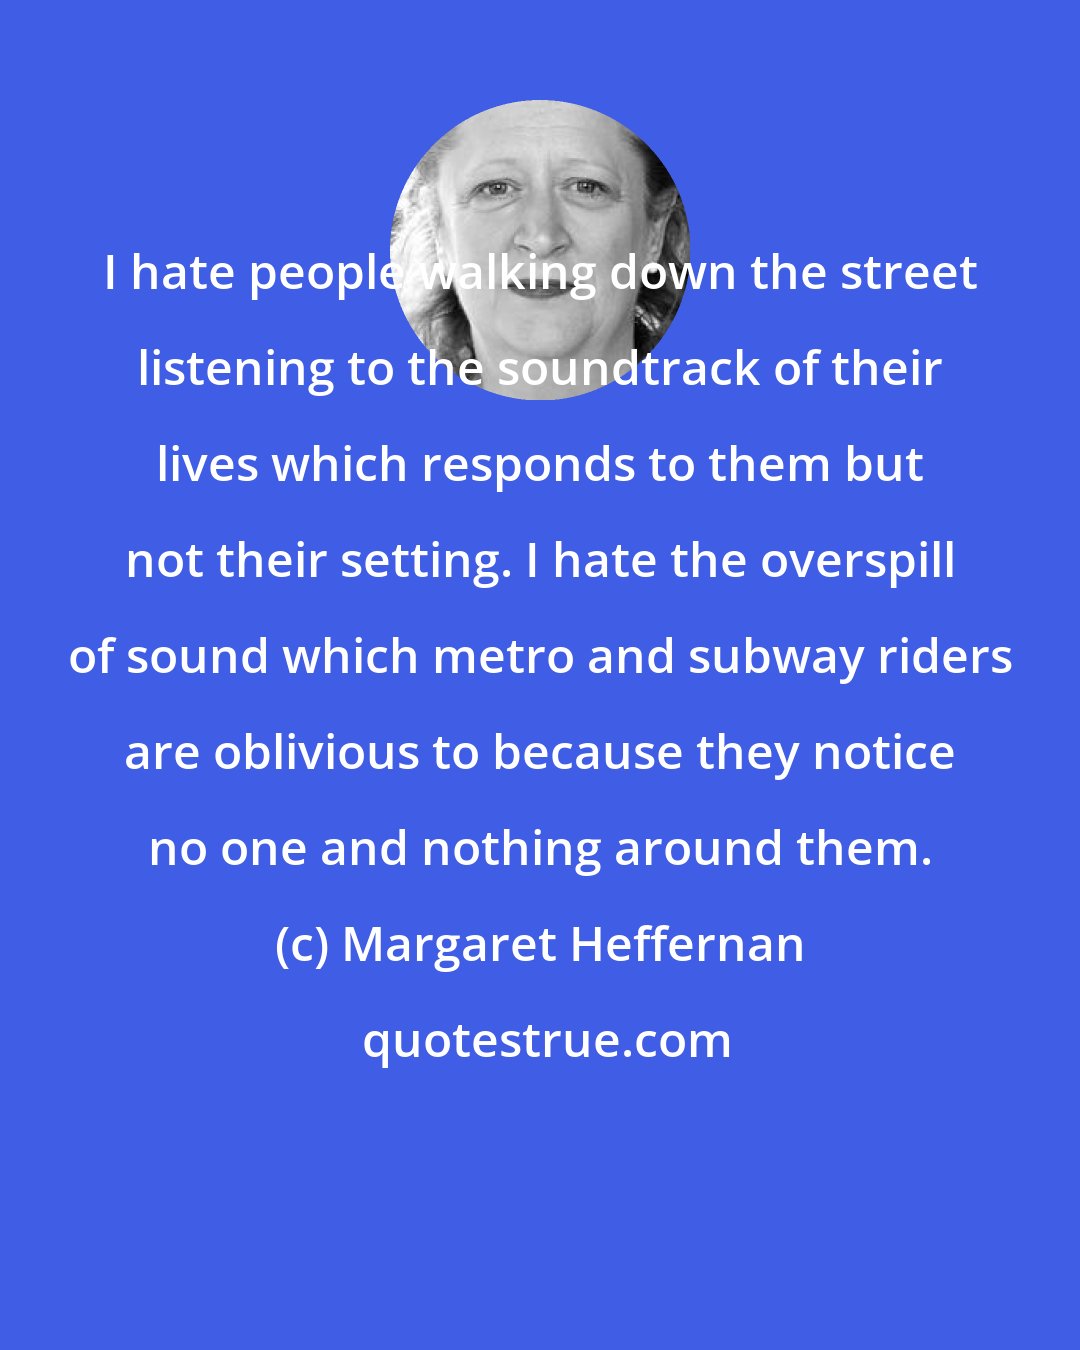 Margaret Heffernan: I hate people walking down the street listening to the soundtrack of their lives which responds to them but not their setting. I hate the overspill of sound which metro and subway riders are oblivious to because they notice no one and nothing around them.